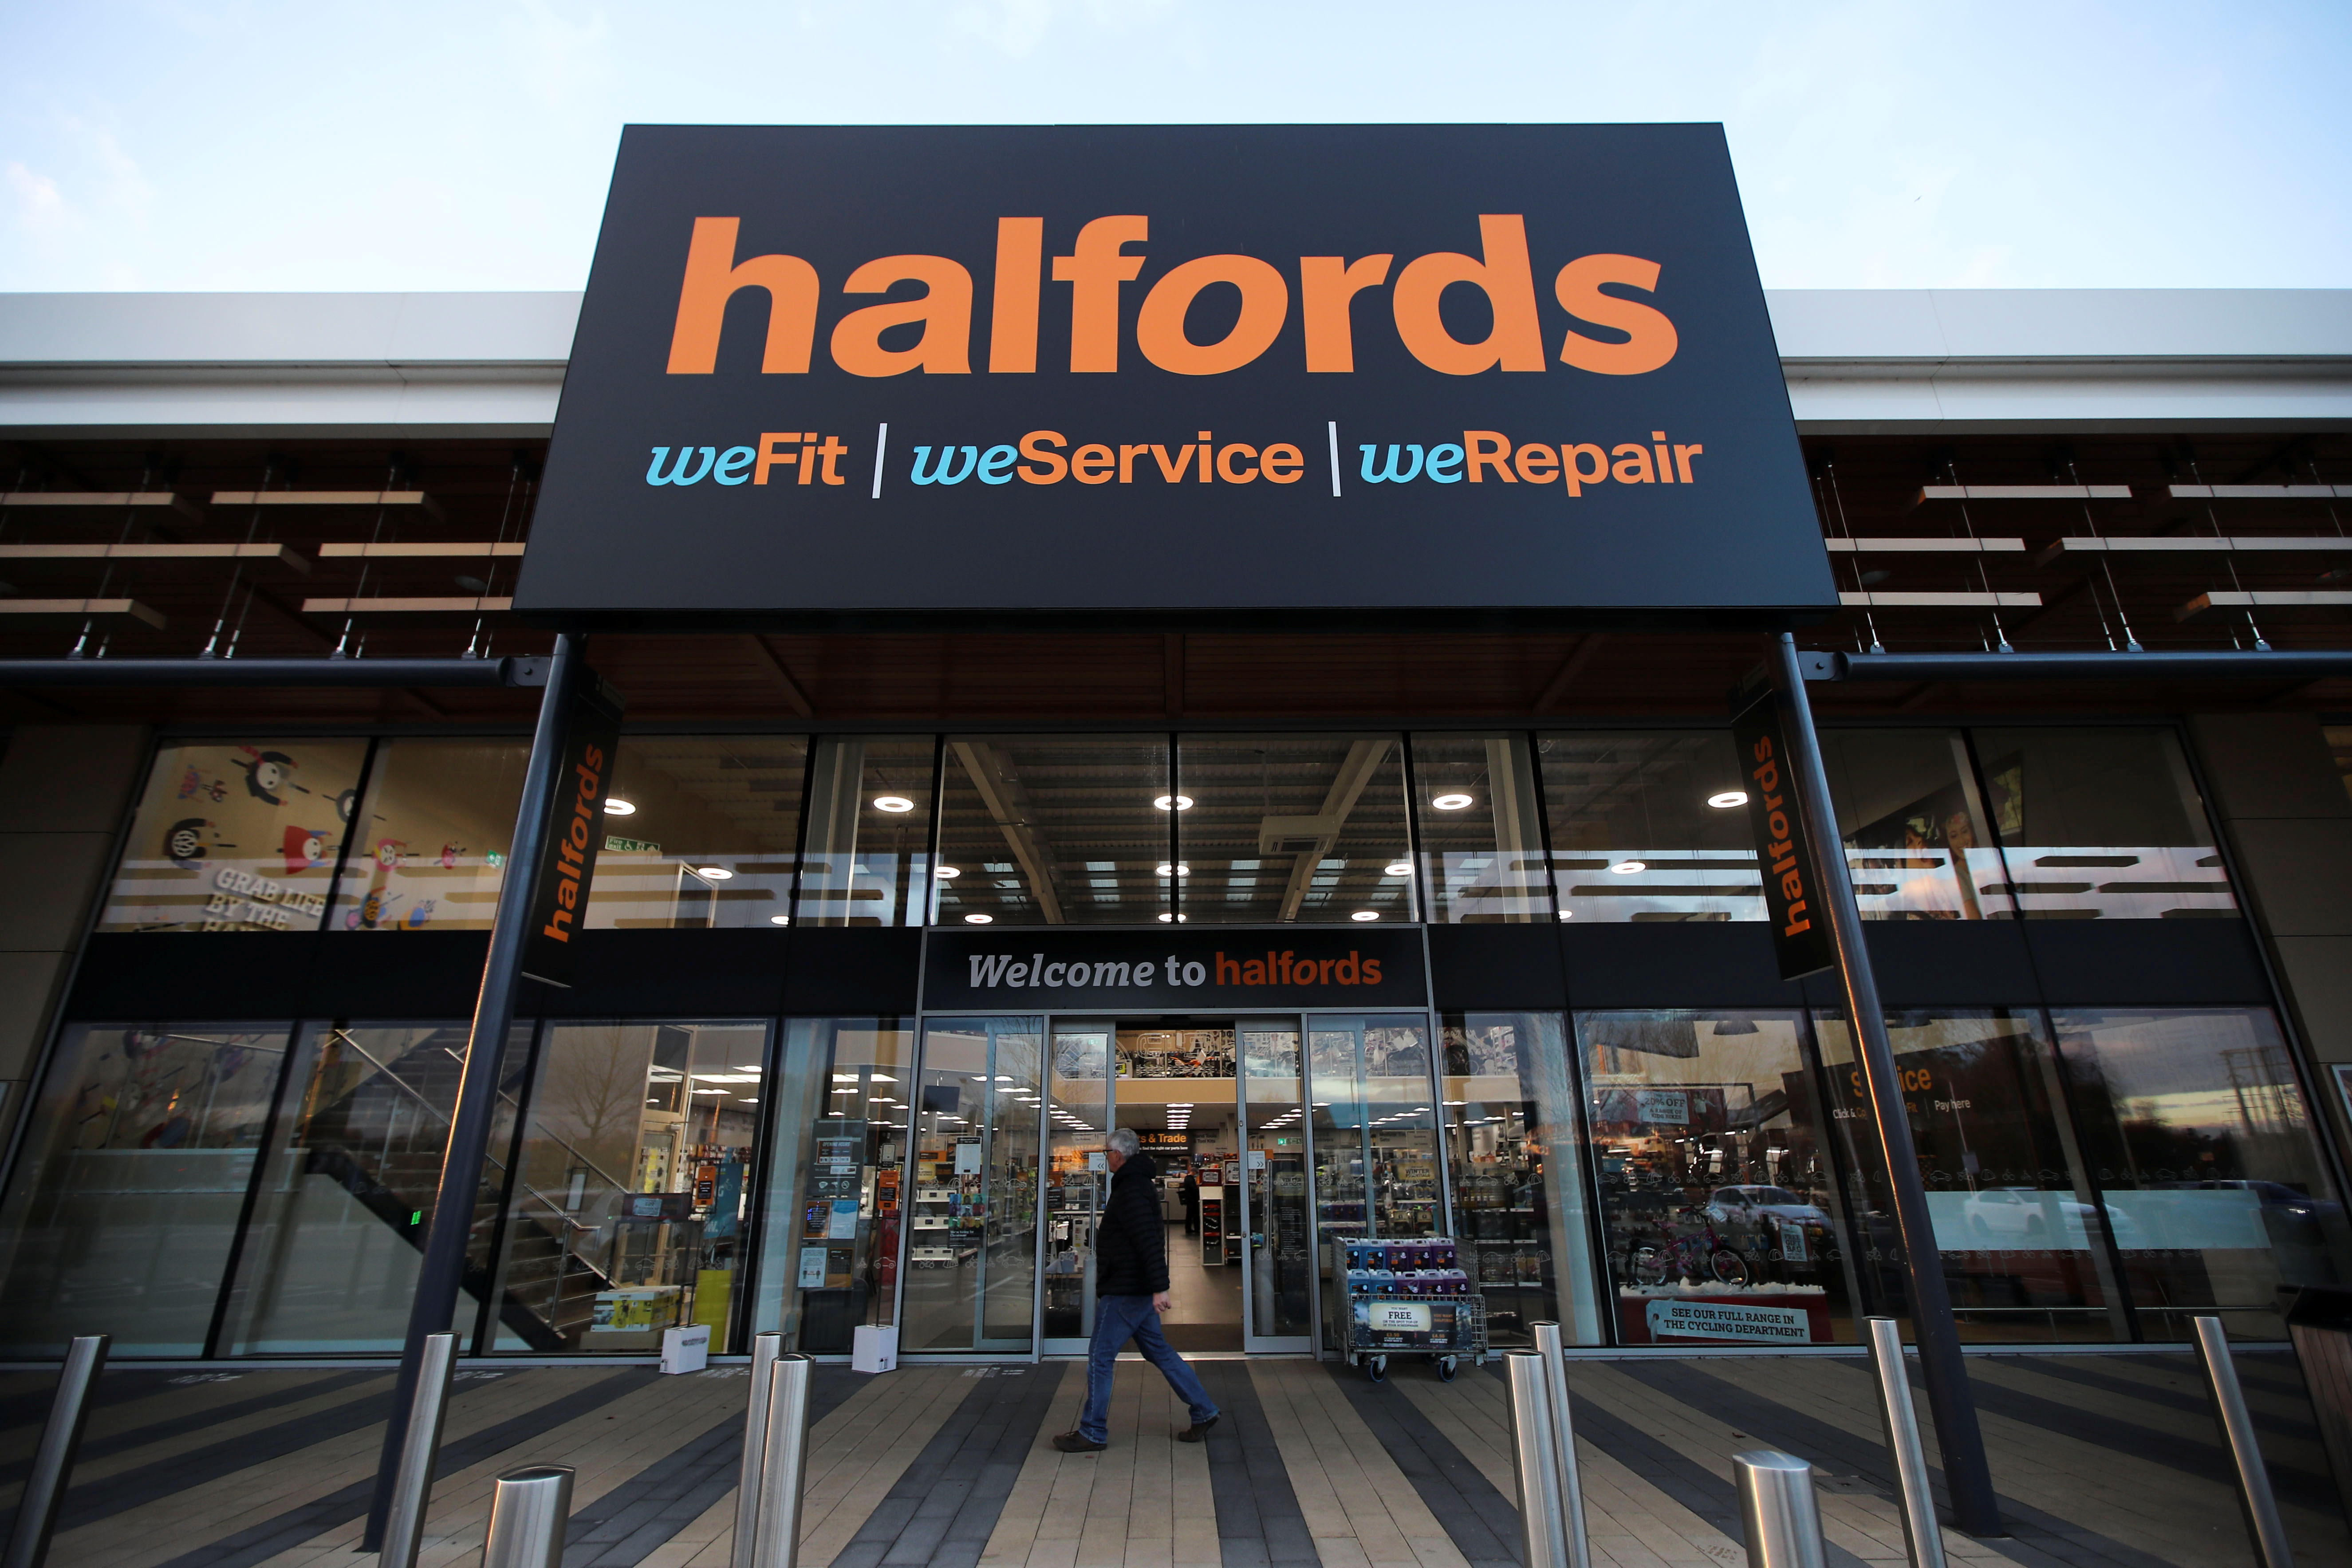 A view of the Halfords store front in Rugby